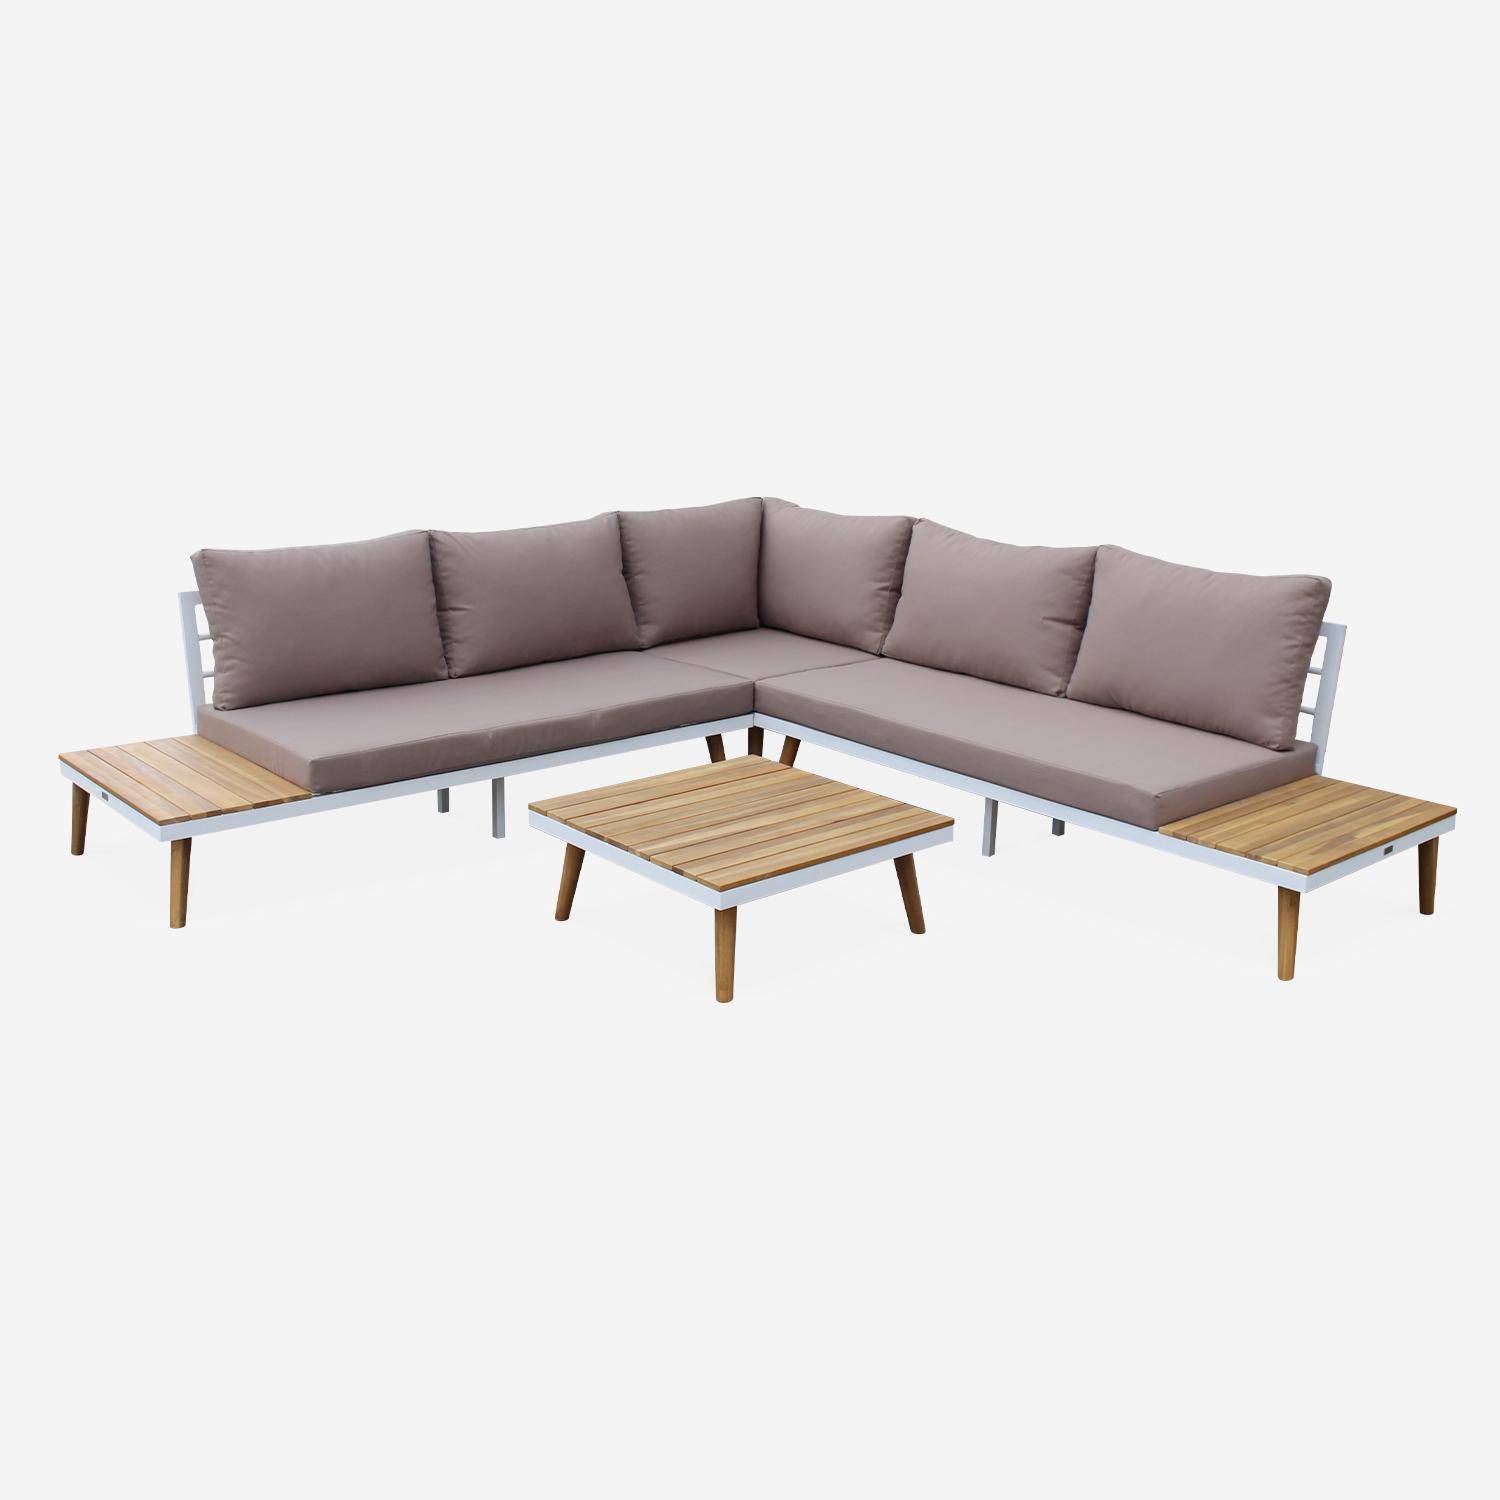 5-seater wooden outdoor sofa - cushions, corner sofa, acacia wood side tables and coffee table, aluminium frame, Scandinavian-style legs - Buenos Aires - Beige-Brown,sweeek,Photo2